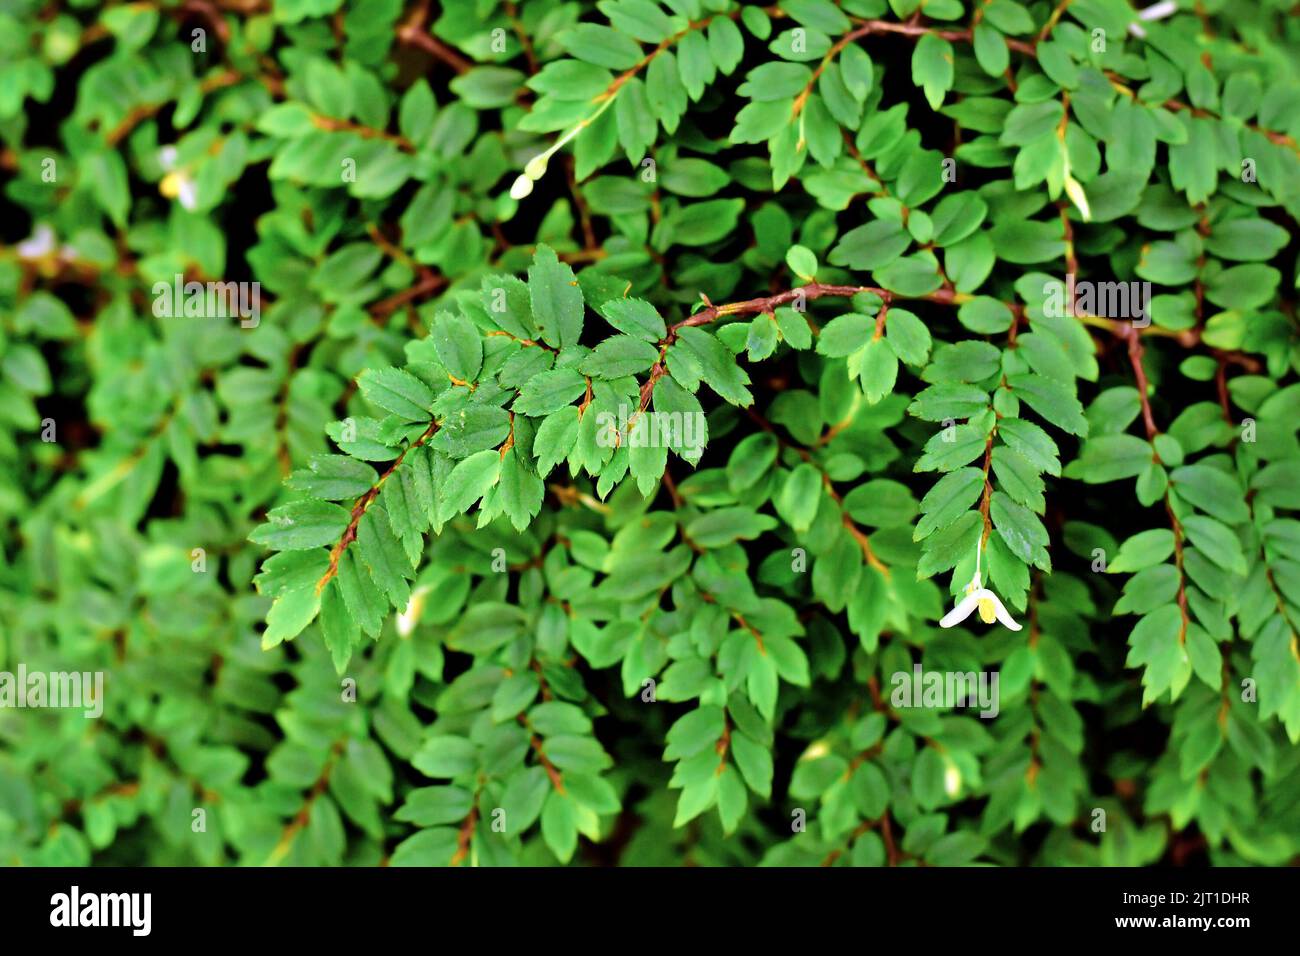 Shrublike 'Begonia Foliosa' plant with glossy oval green leaves Stock Photo